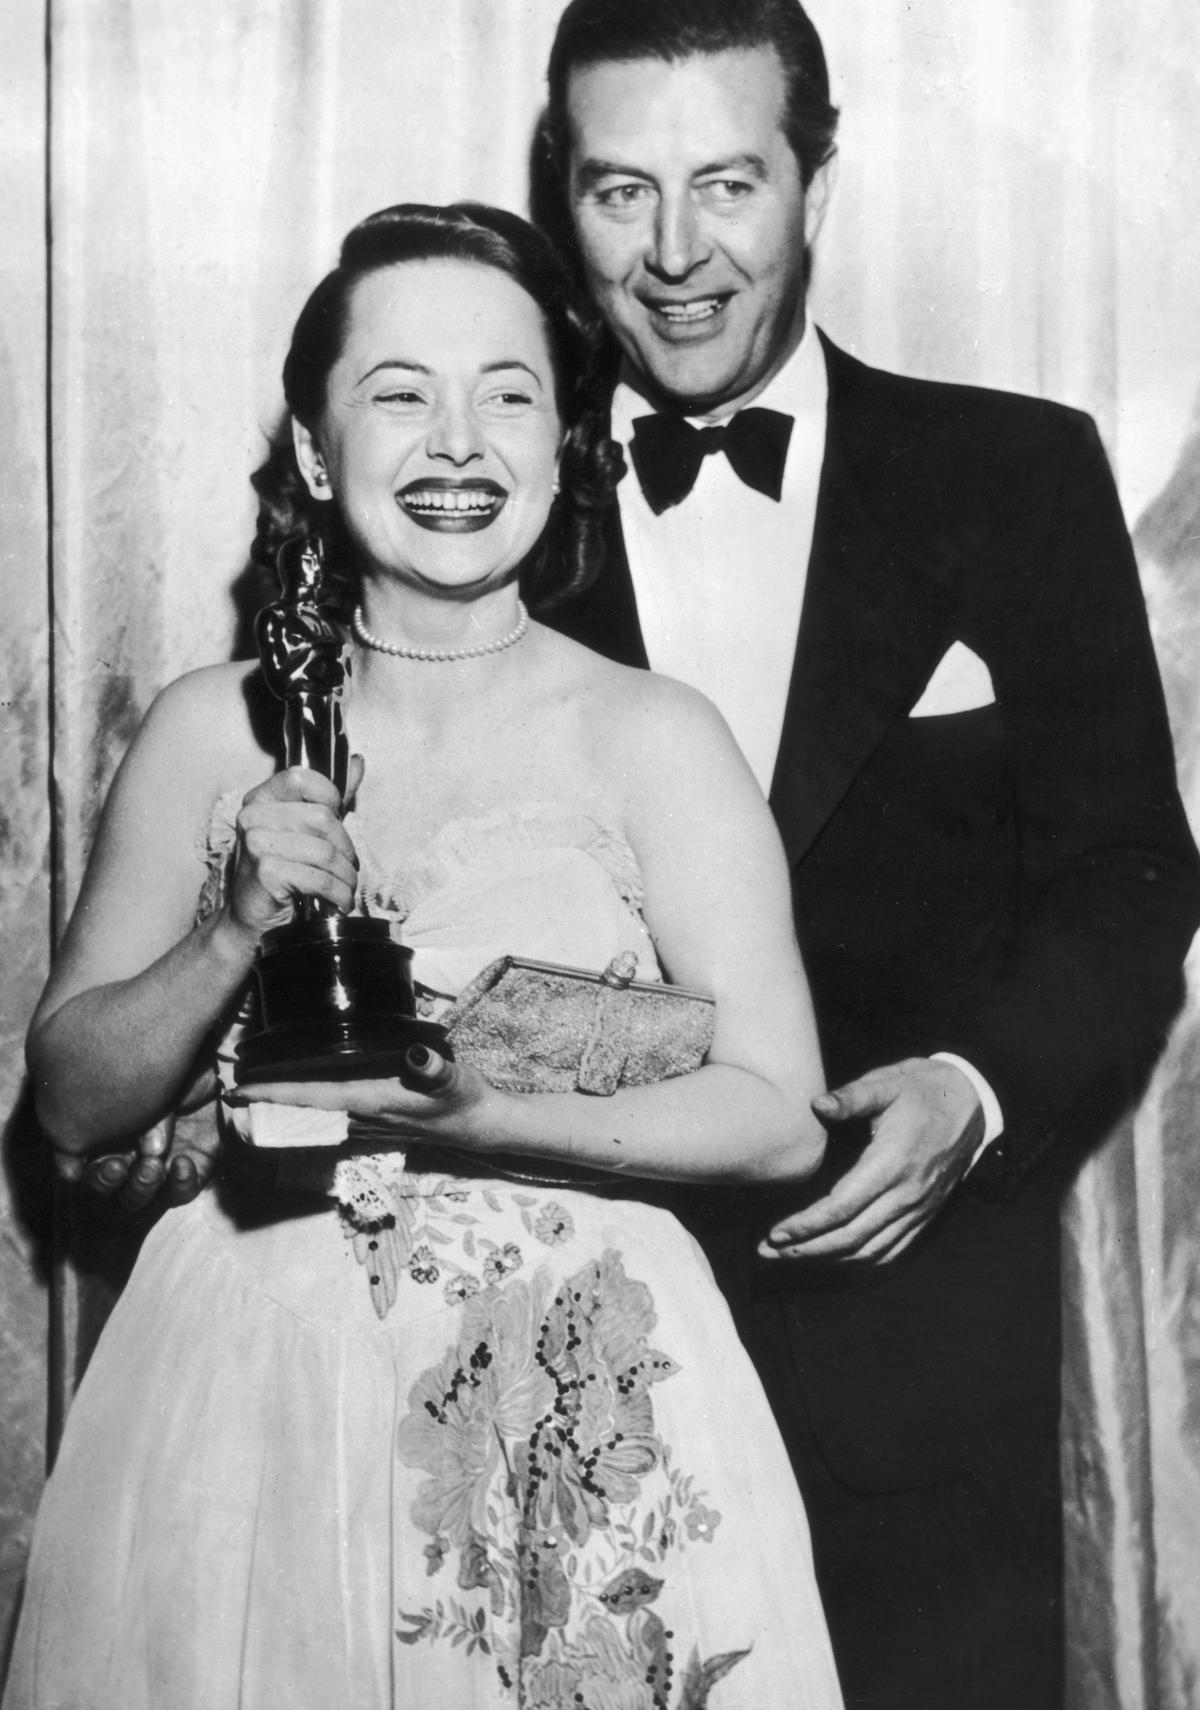 Olivia de Havilland receives her Best Actress Oscar from the actor Ray Milland for "To Each His Own" on March 19, 1947. (Keystone/Getty Images)